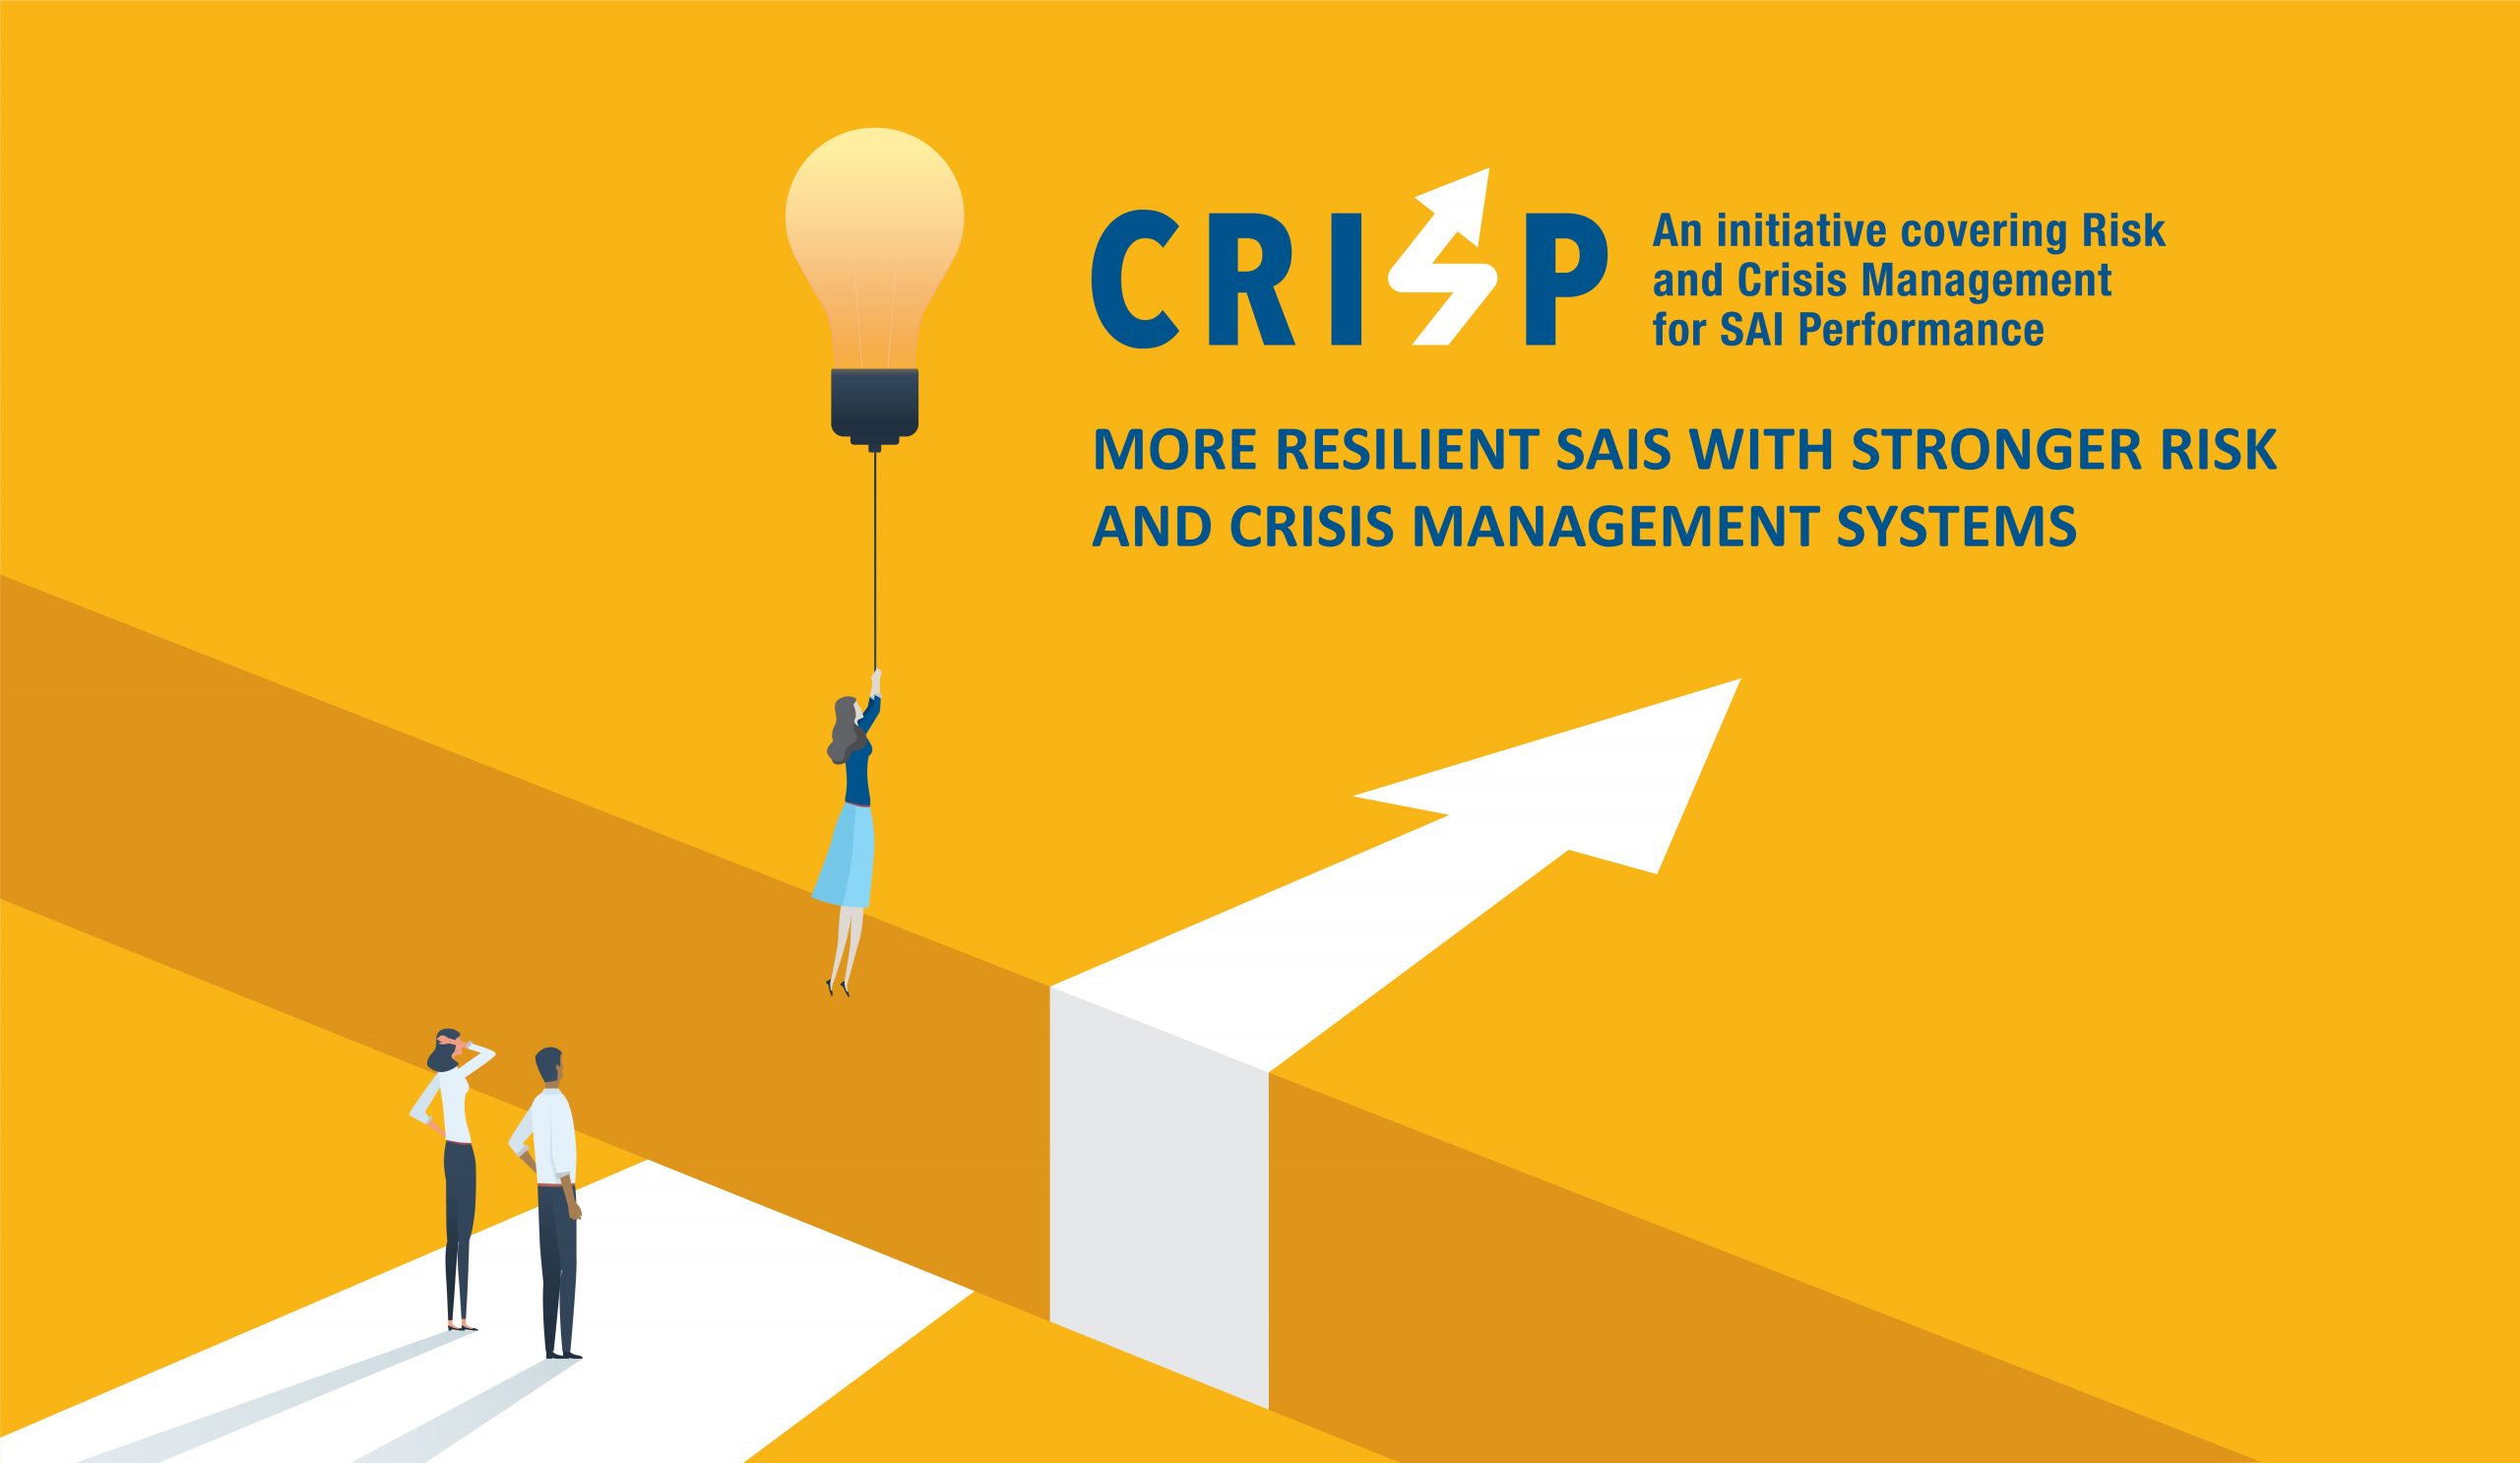 Graphic: IDI Launches Initiative to Help SAIs Strengthen Crisis and Risk Management